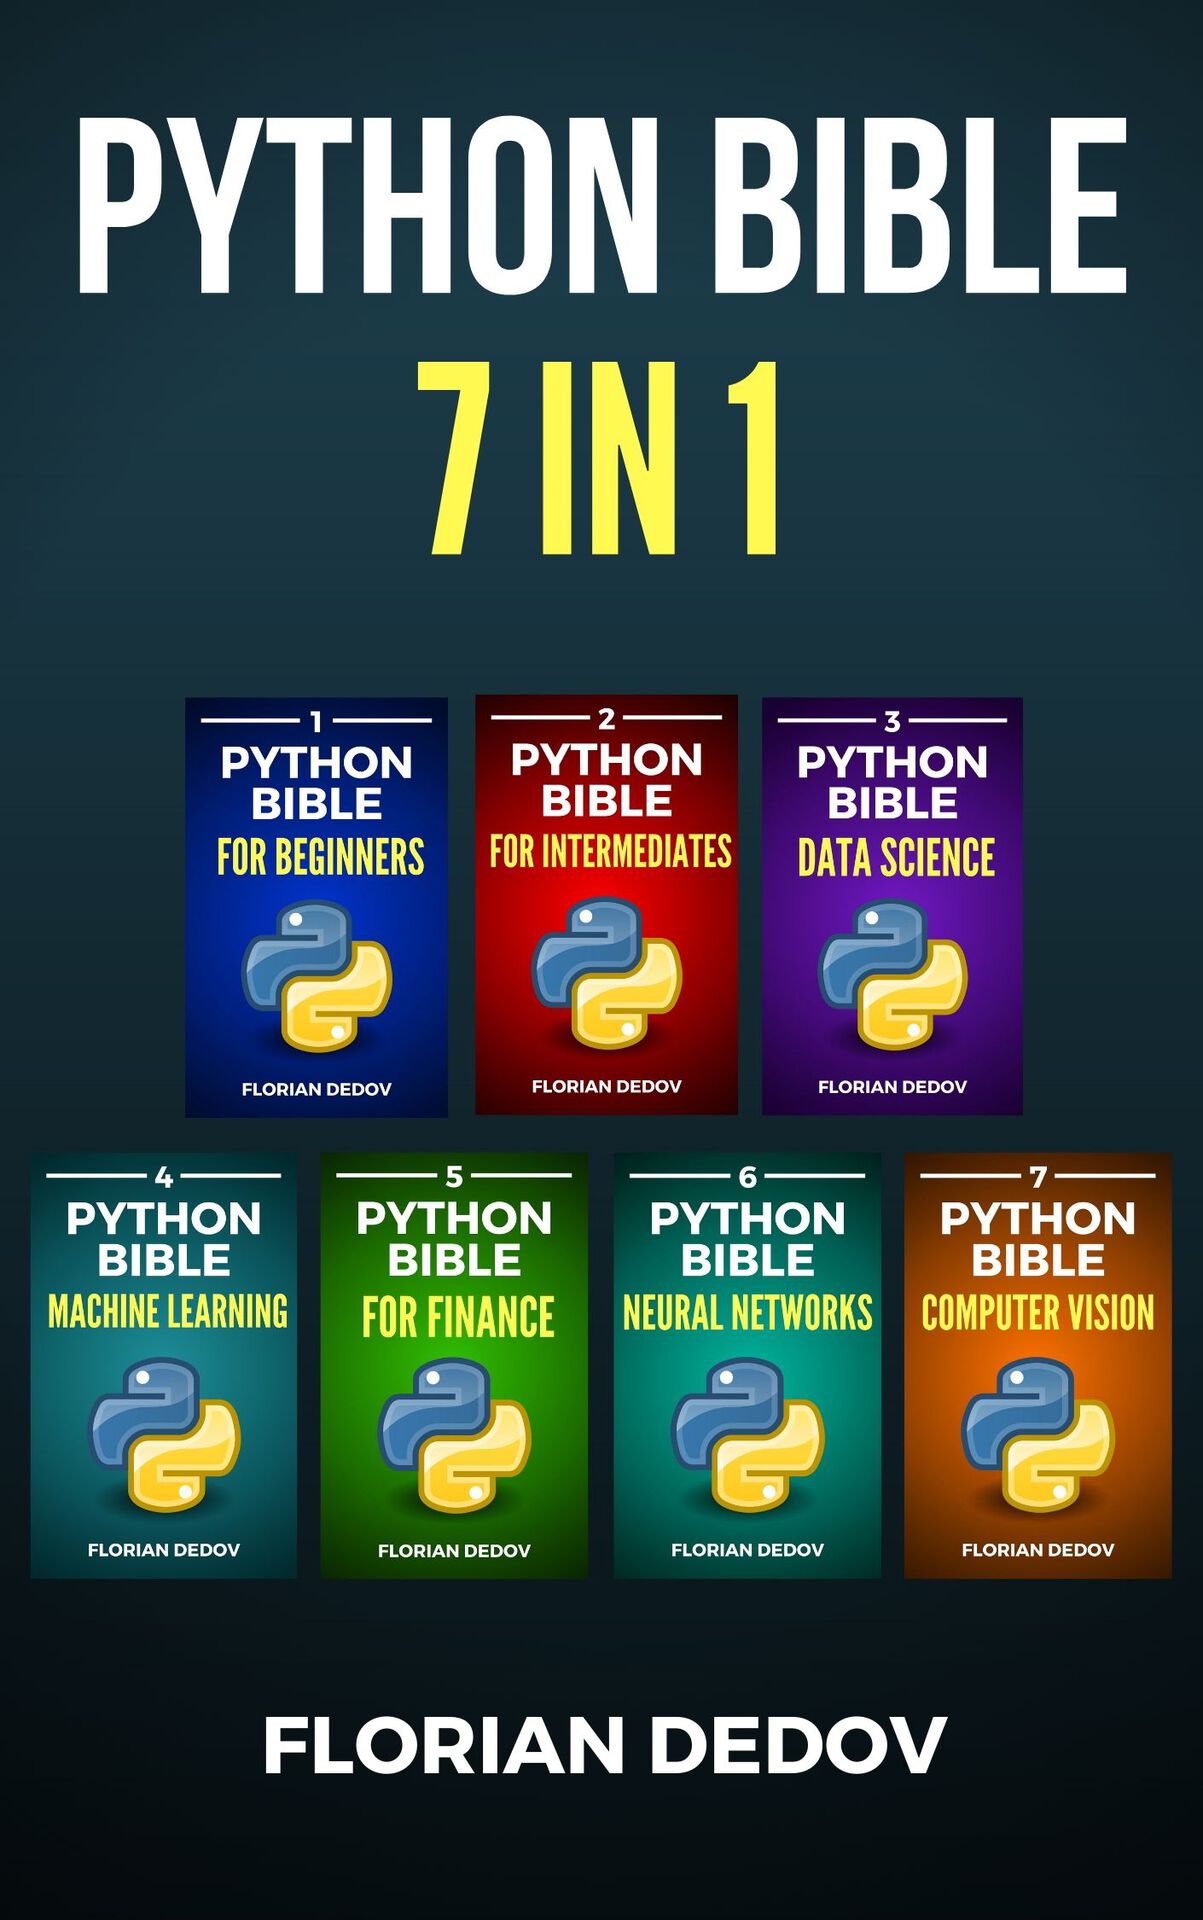 The Python Bible 7 in 1: Volumes One To Seven (Beginner, Intermediate, Data Science, Machine Learning, Finance, Neural Networks, Computer Vision)